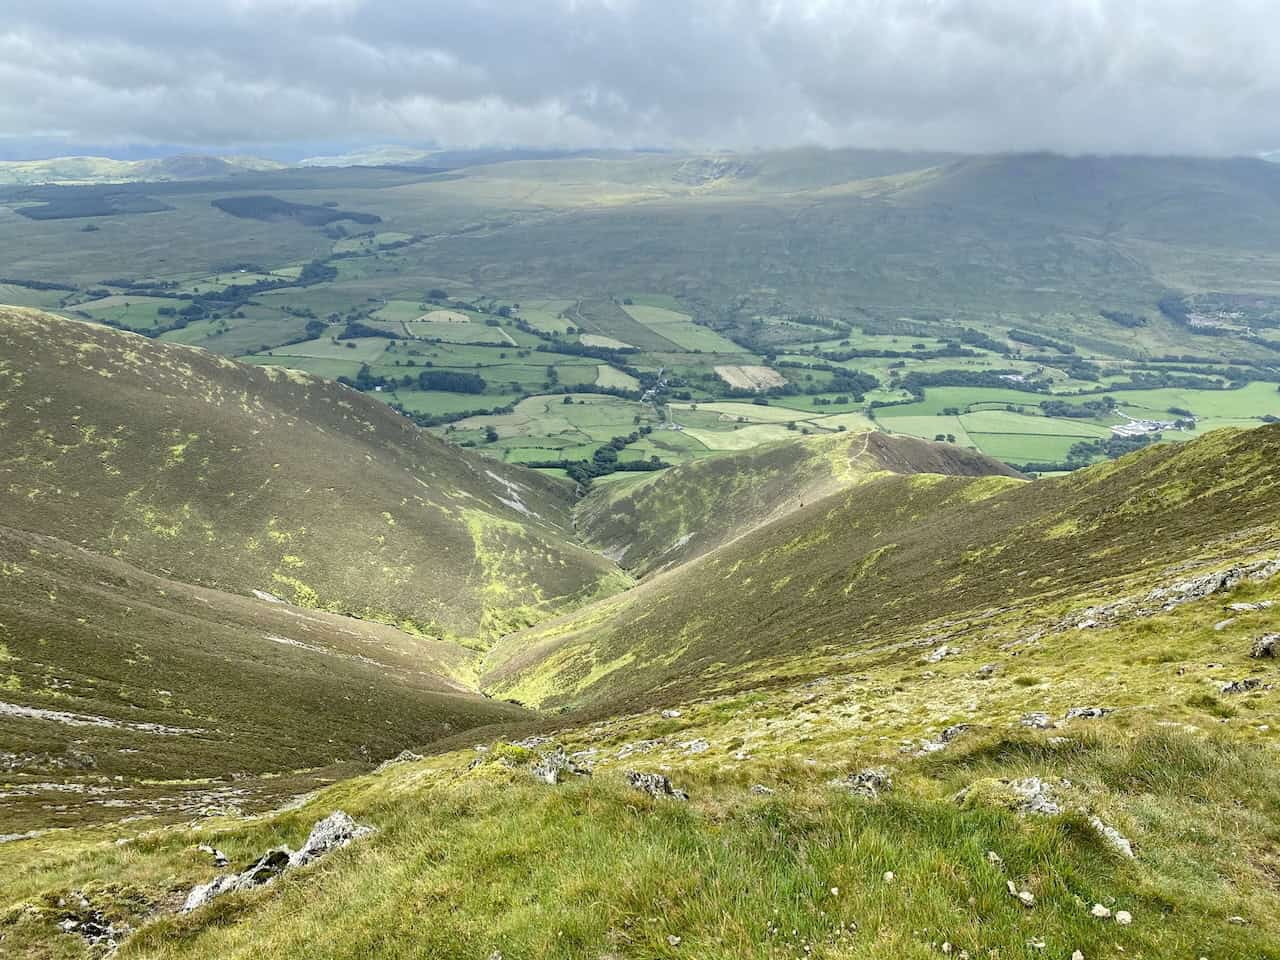 The valley cut by Scaley Beck between Doddick Fell (right) and Scales Fell (left).